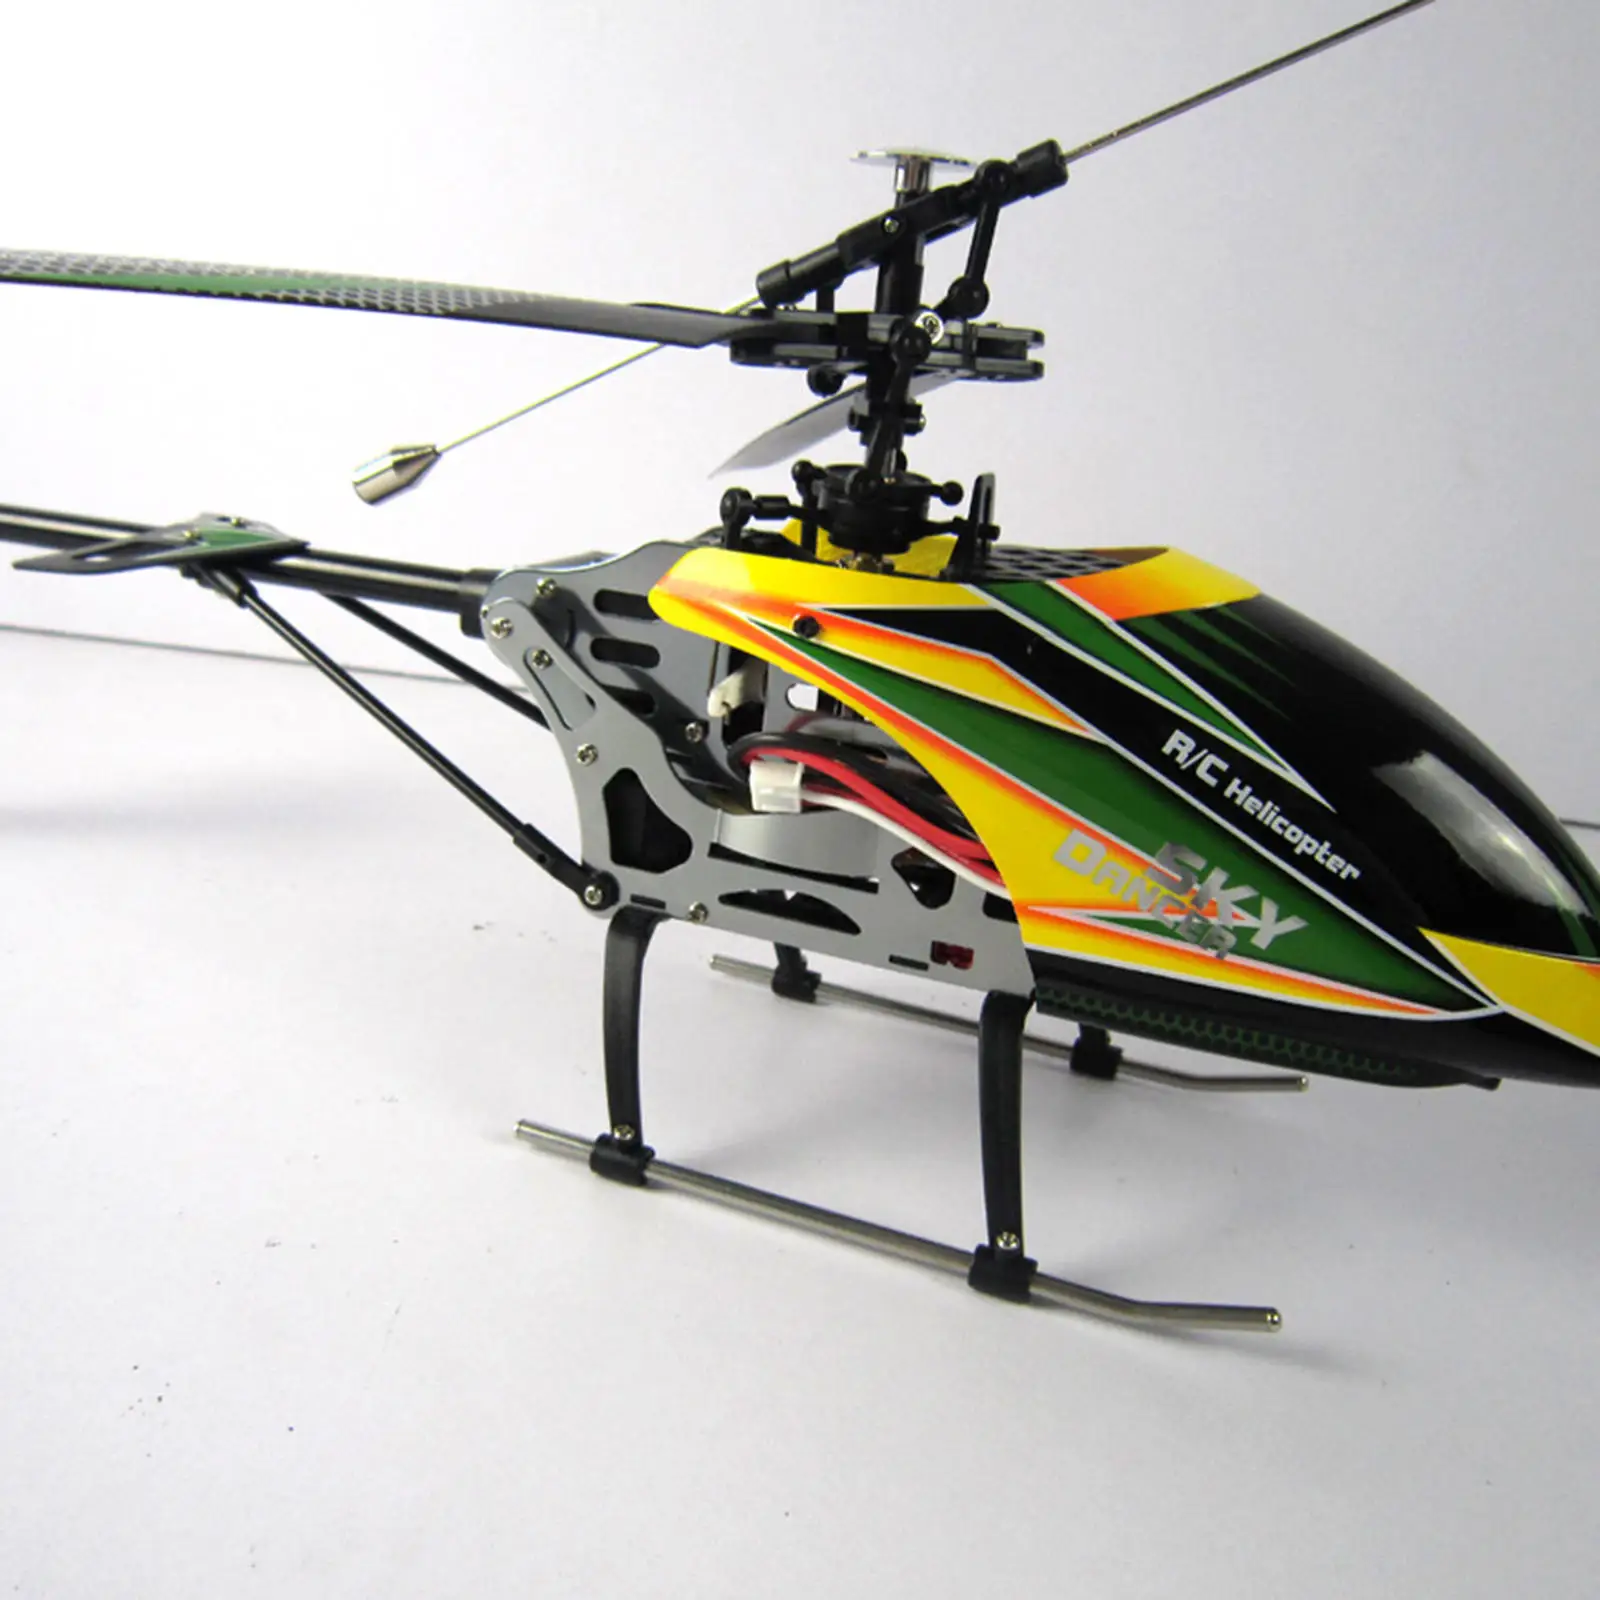 Yellow 2.4G Display 4CH RC Remote Control Helicopter RTF For WLtoys V912 Exquisitely Designed Durable for Boys Kids